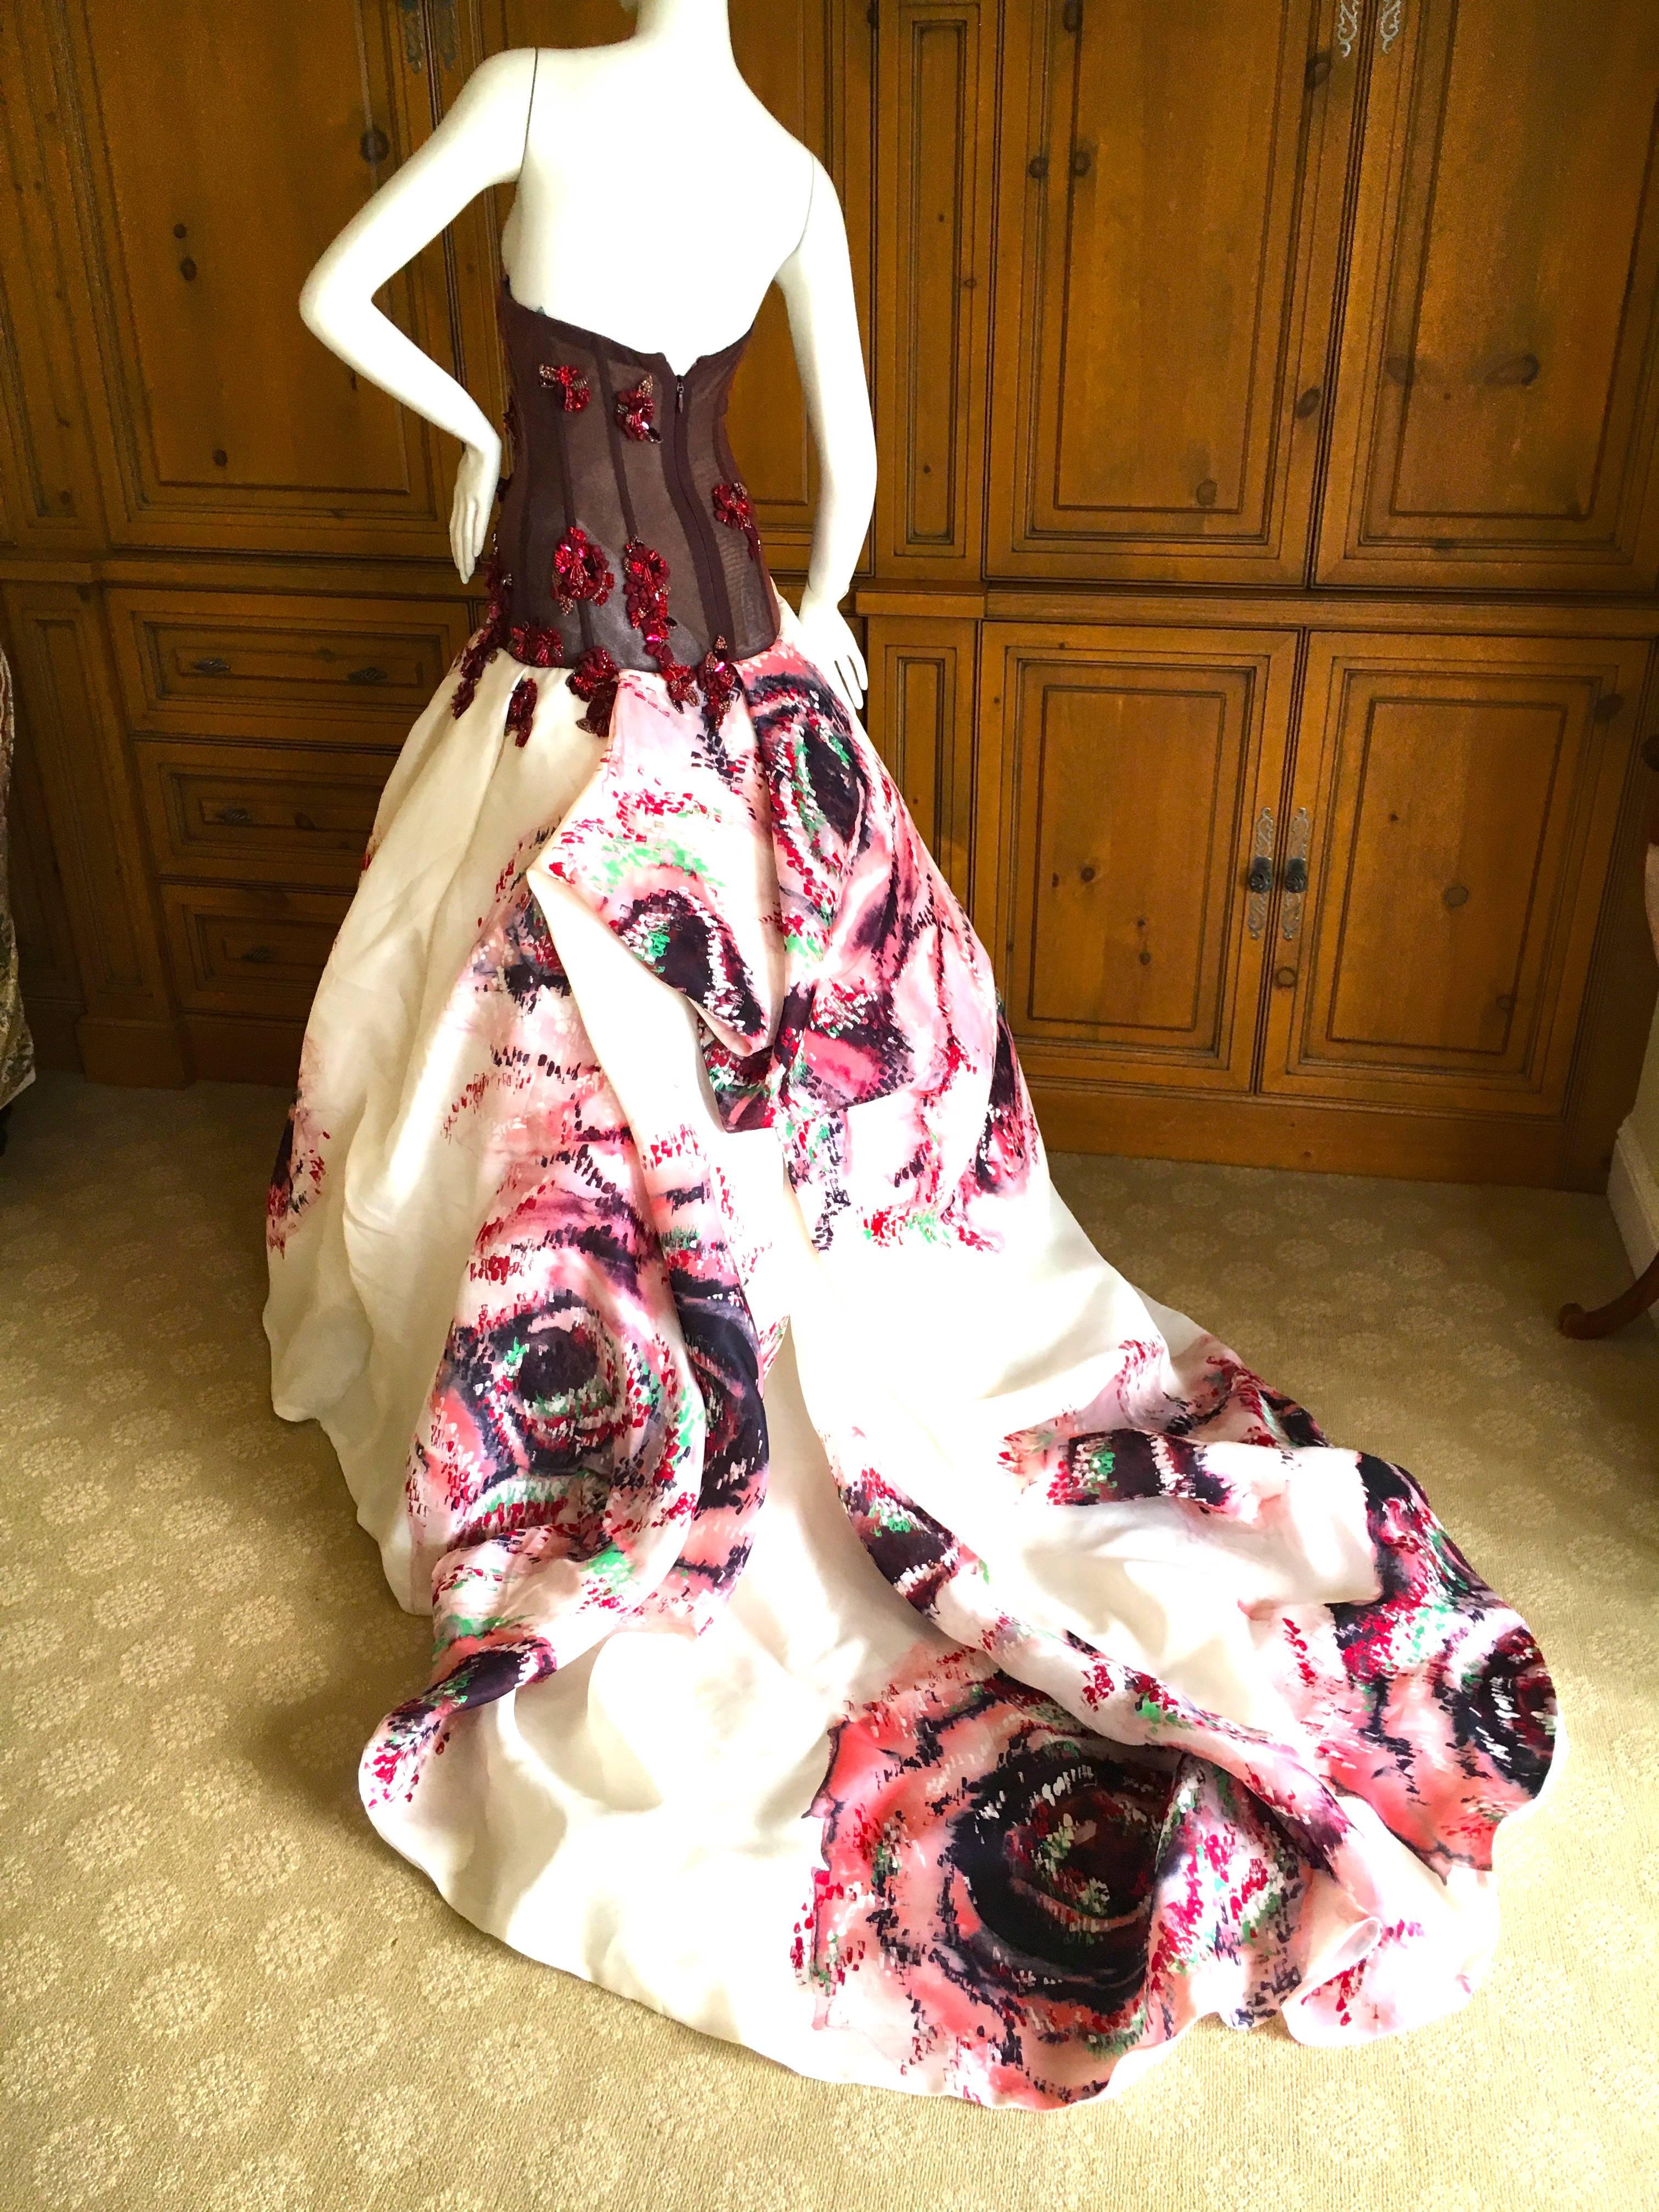 Extraordinary ball gown from Monique Lhuillier.
Featuring a corset embellished with beaded flowers, and a huge billowing floral skirt with a very long train.
This is such an amazing piece, custom made, worn once.
Size 2
Bust 34